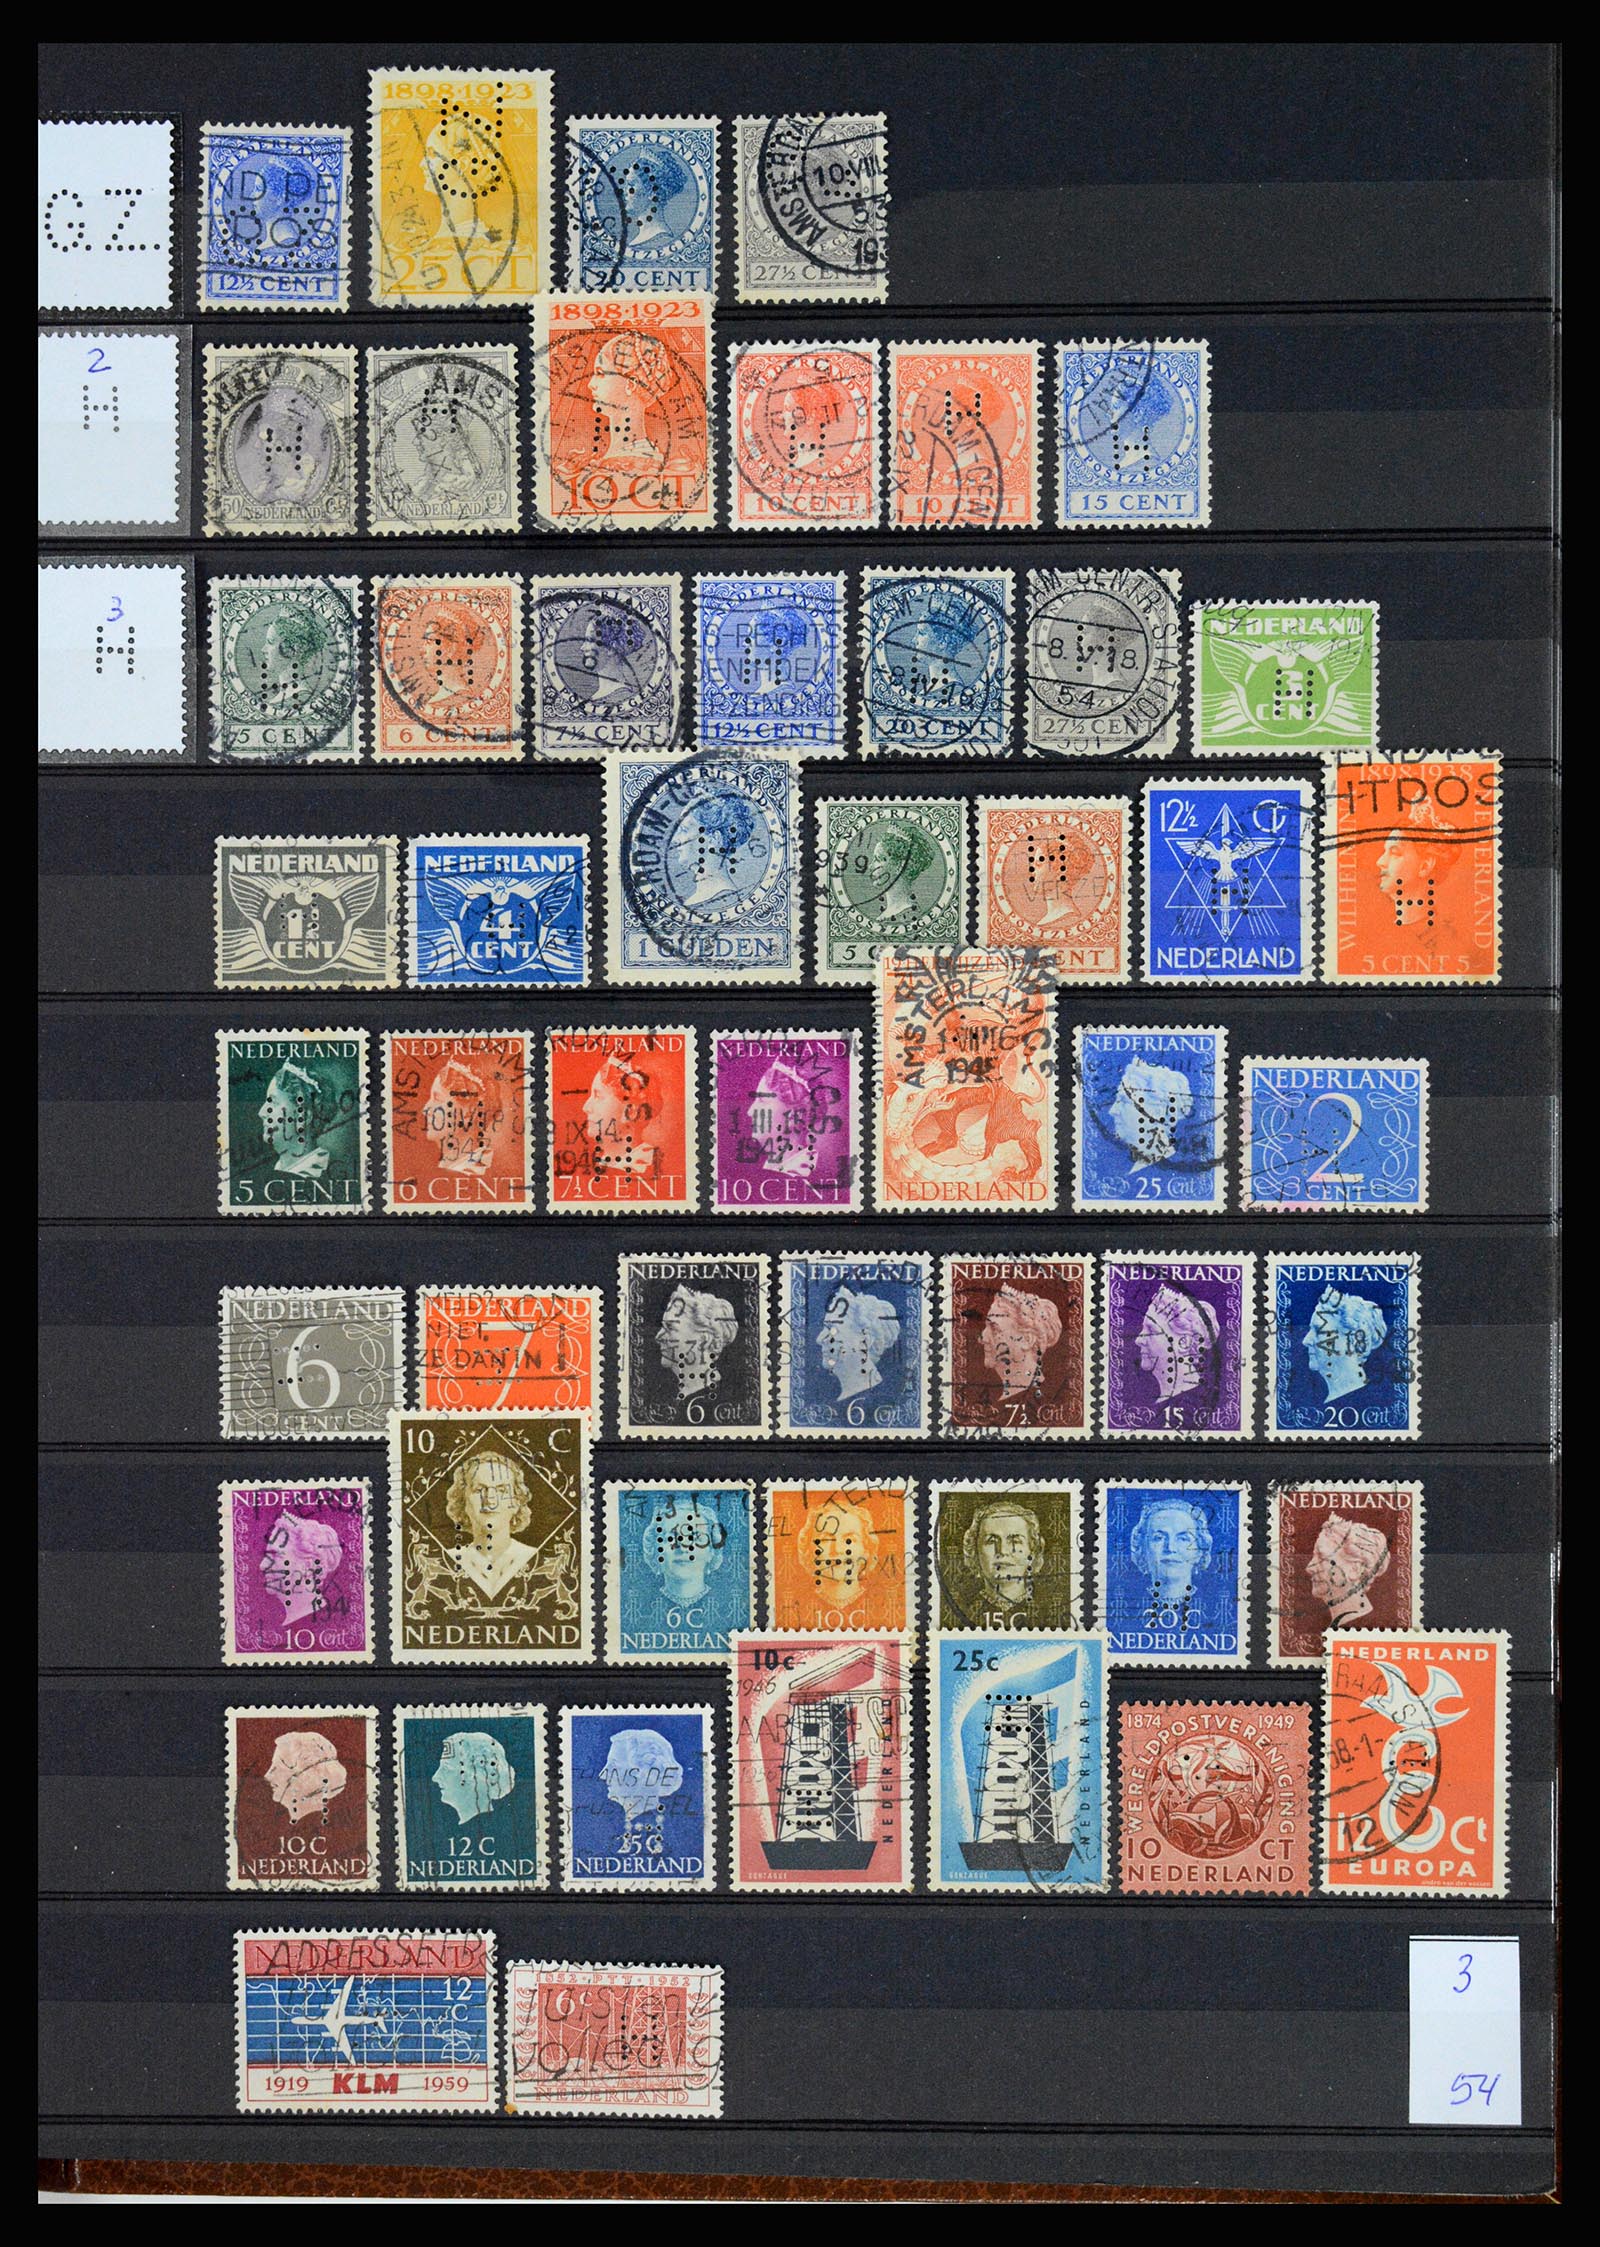 37183 014 - Stamp collection 37183 Netherlands perfins 1872-1960.